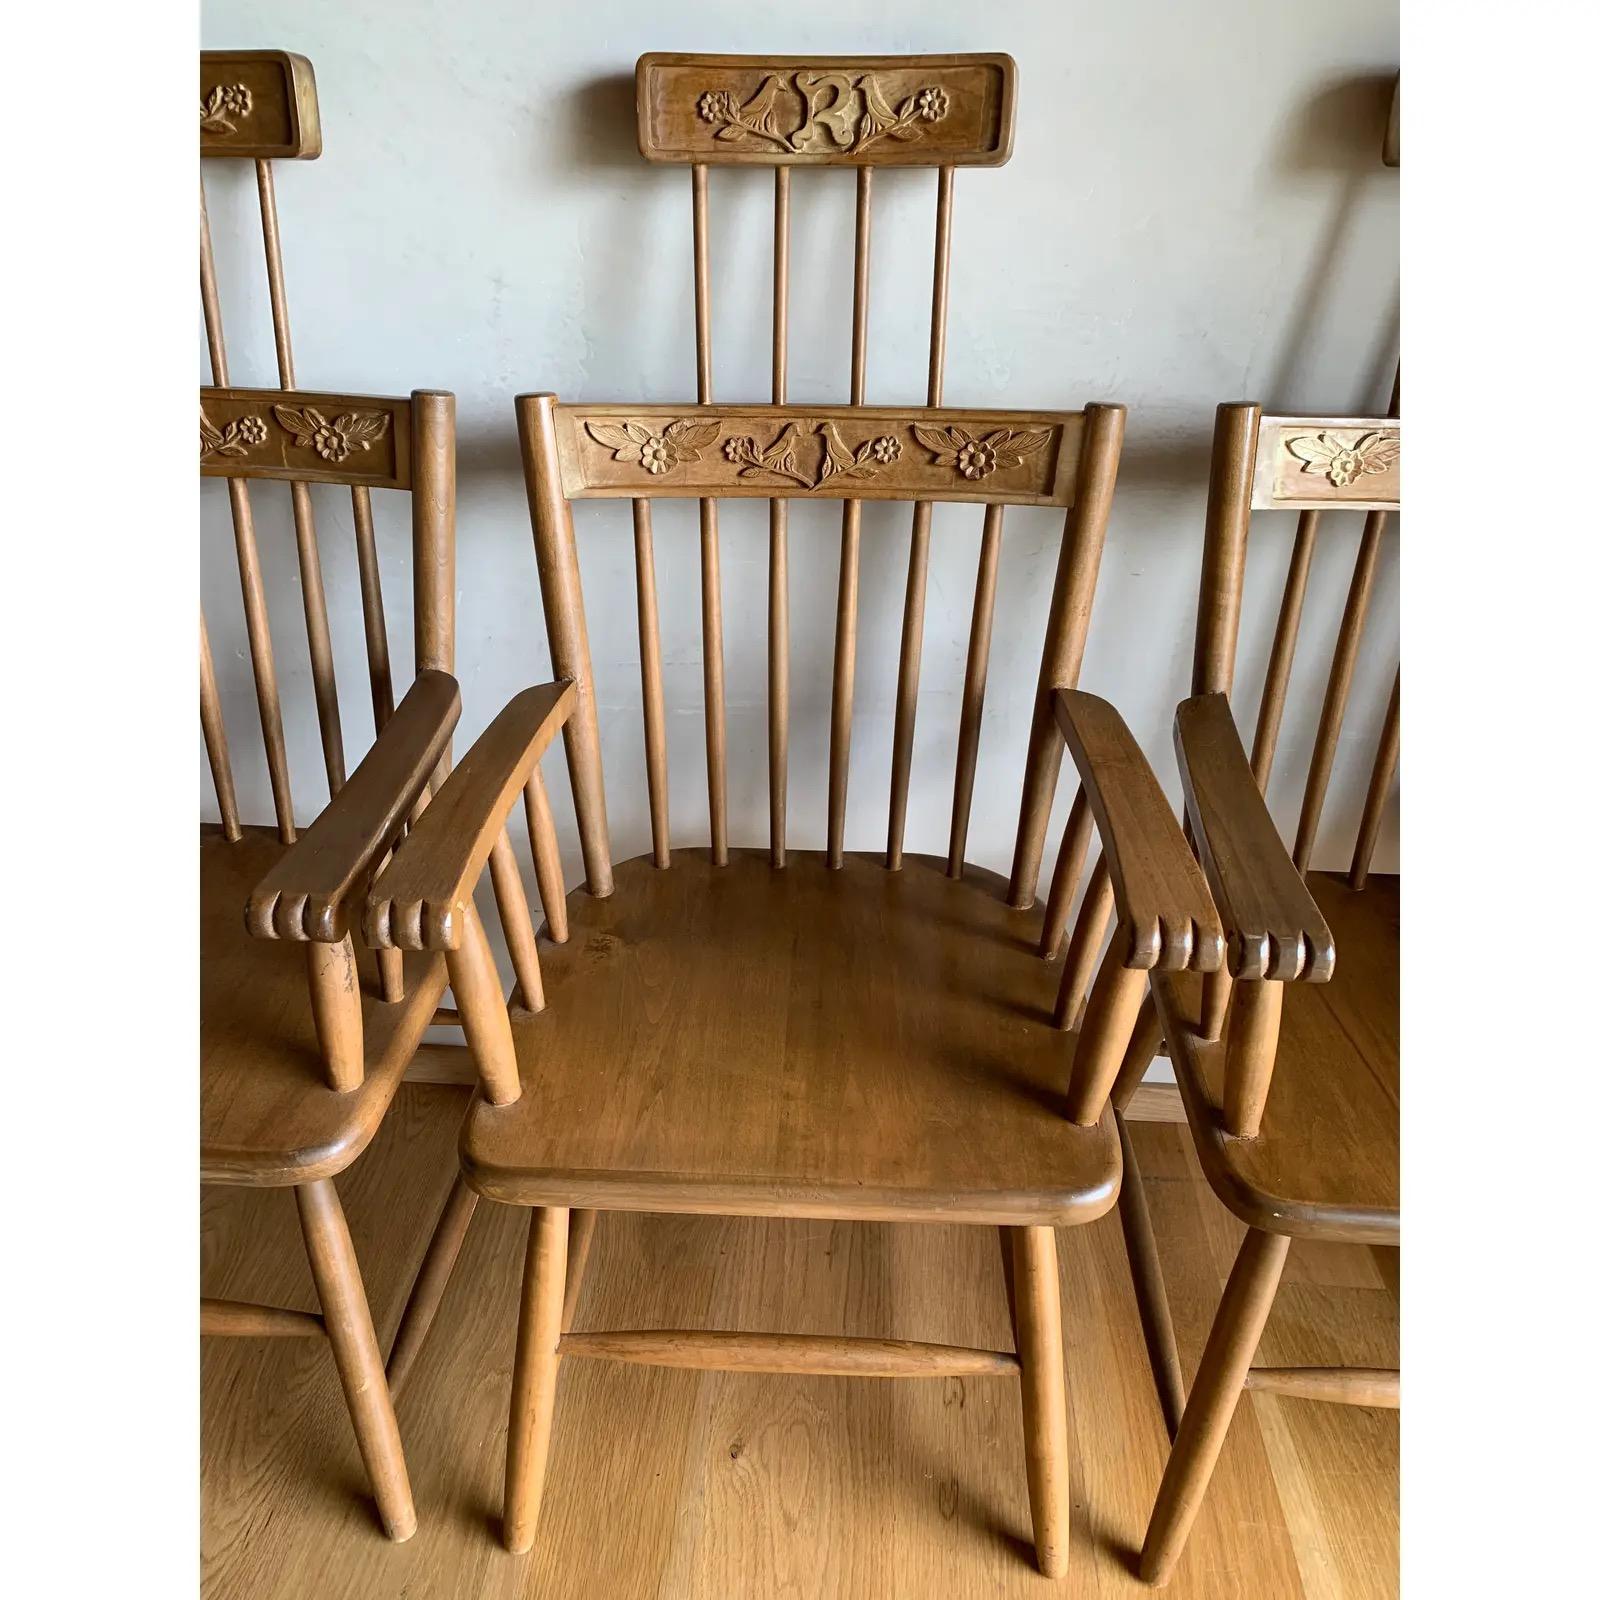 Vintage Hand Carved Spindle Birdcage Cage Back Chairs Flowers Birds-set of 6 In Good Condition For Sale In El Cajon, CA